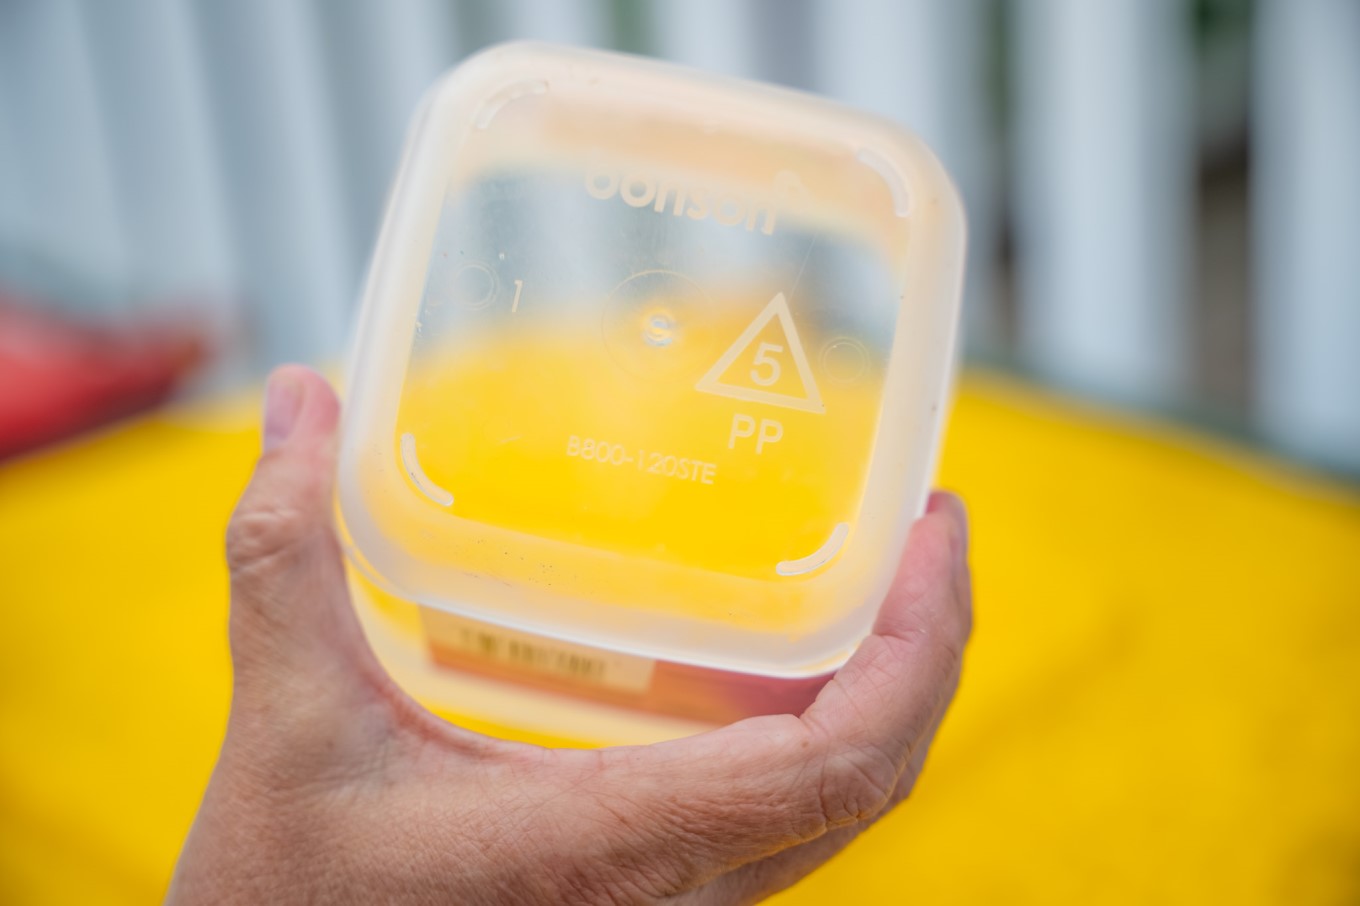 Check the number inside the triangular recycling symbol before putting it inside your recycling bin and, where possible, try and avoid plastics that aren’t labelled 1, 2 and 5.